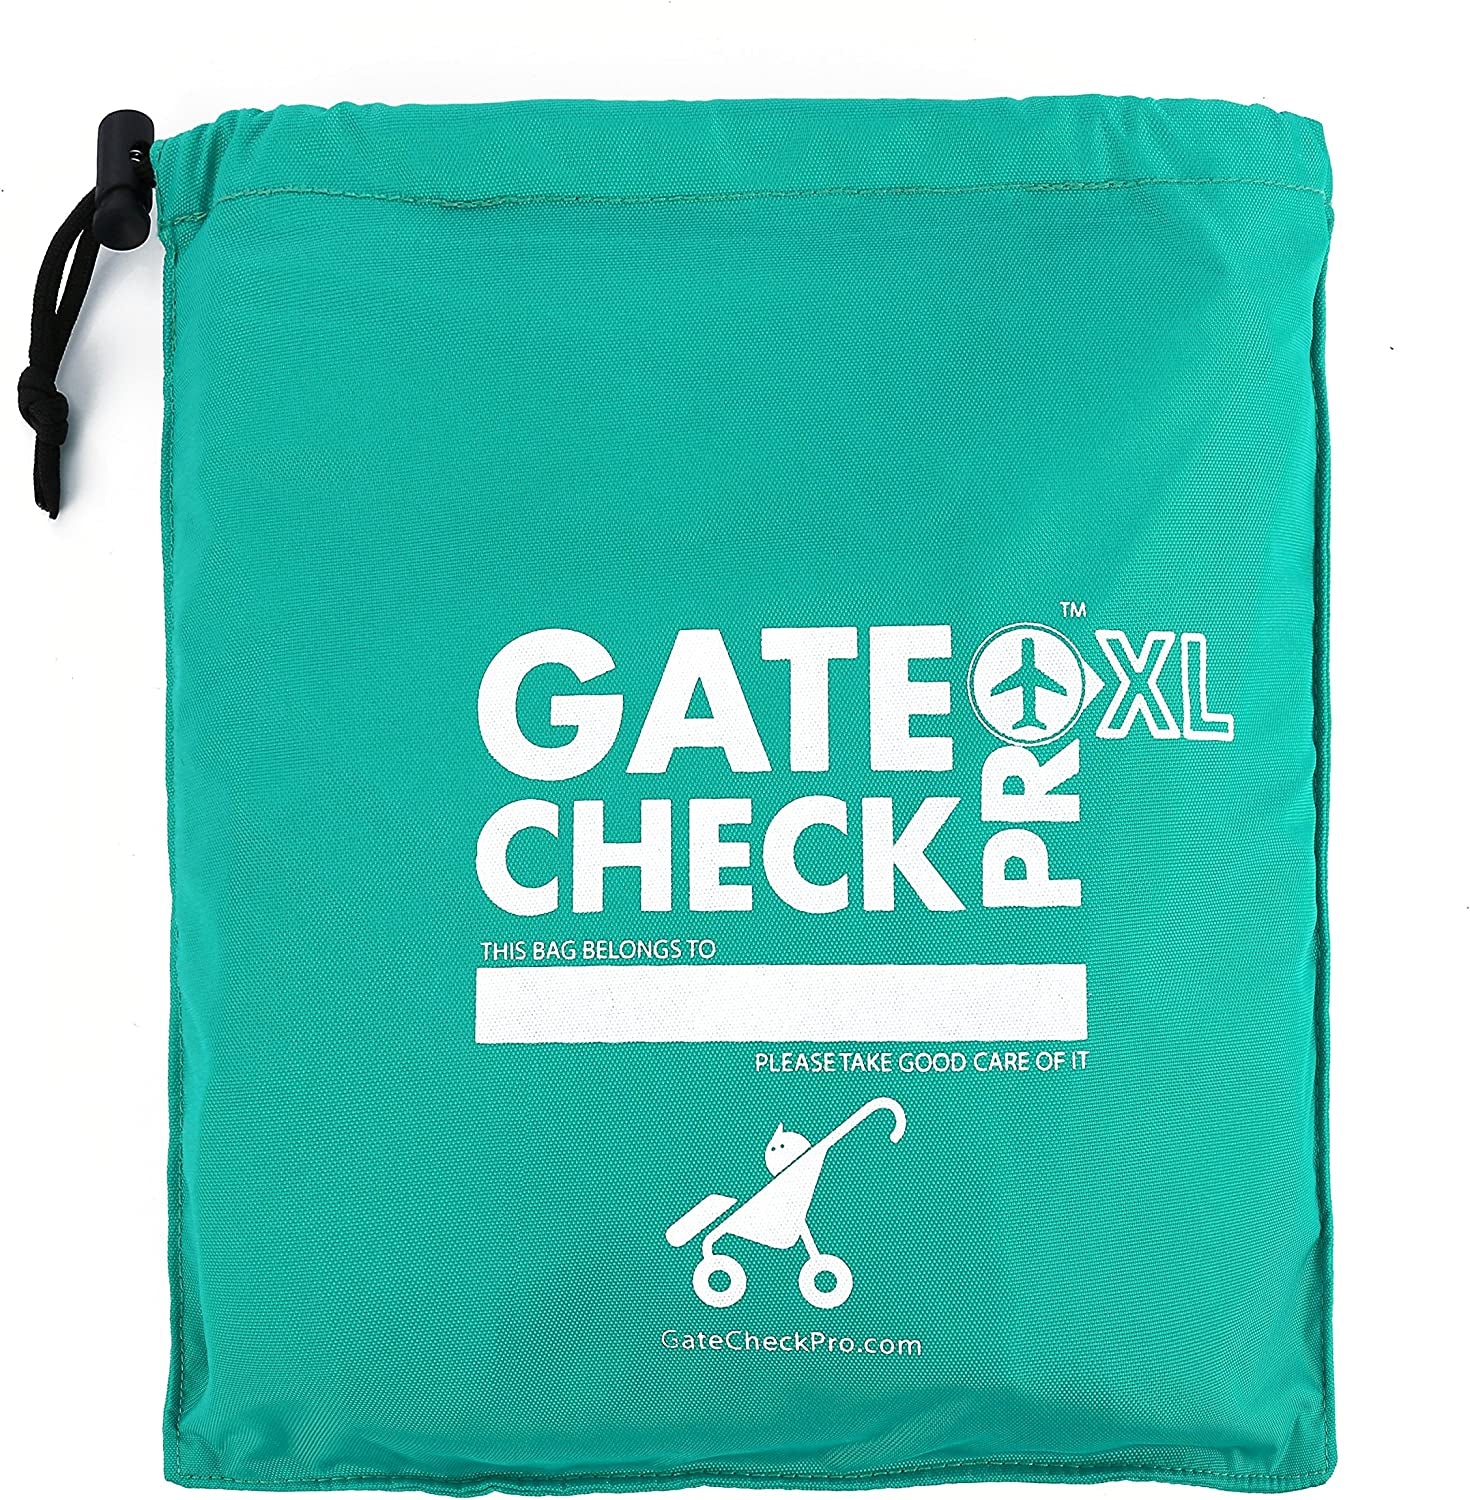 Gate Check PRO XL Double Buggy | Pram & Pushchair Travel Bag | Ultra Durable Ballistic Nylon | Travel System Featuring Padded Backpack Shoulder Straps for Comfort (Made by The #1 Specialist Brand)